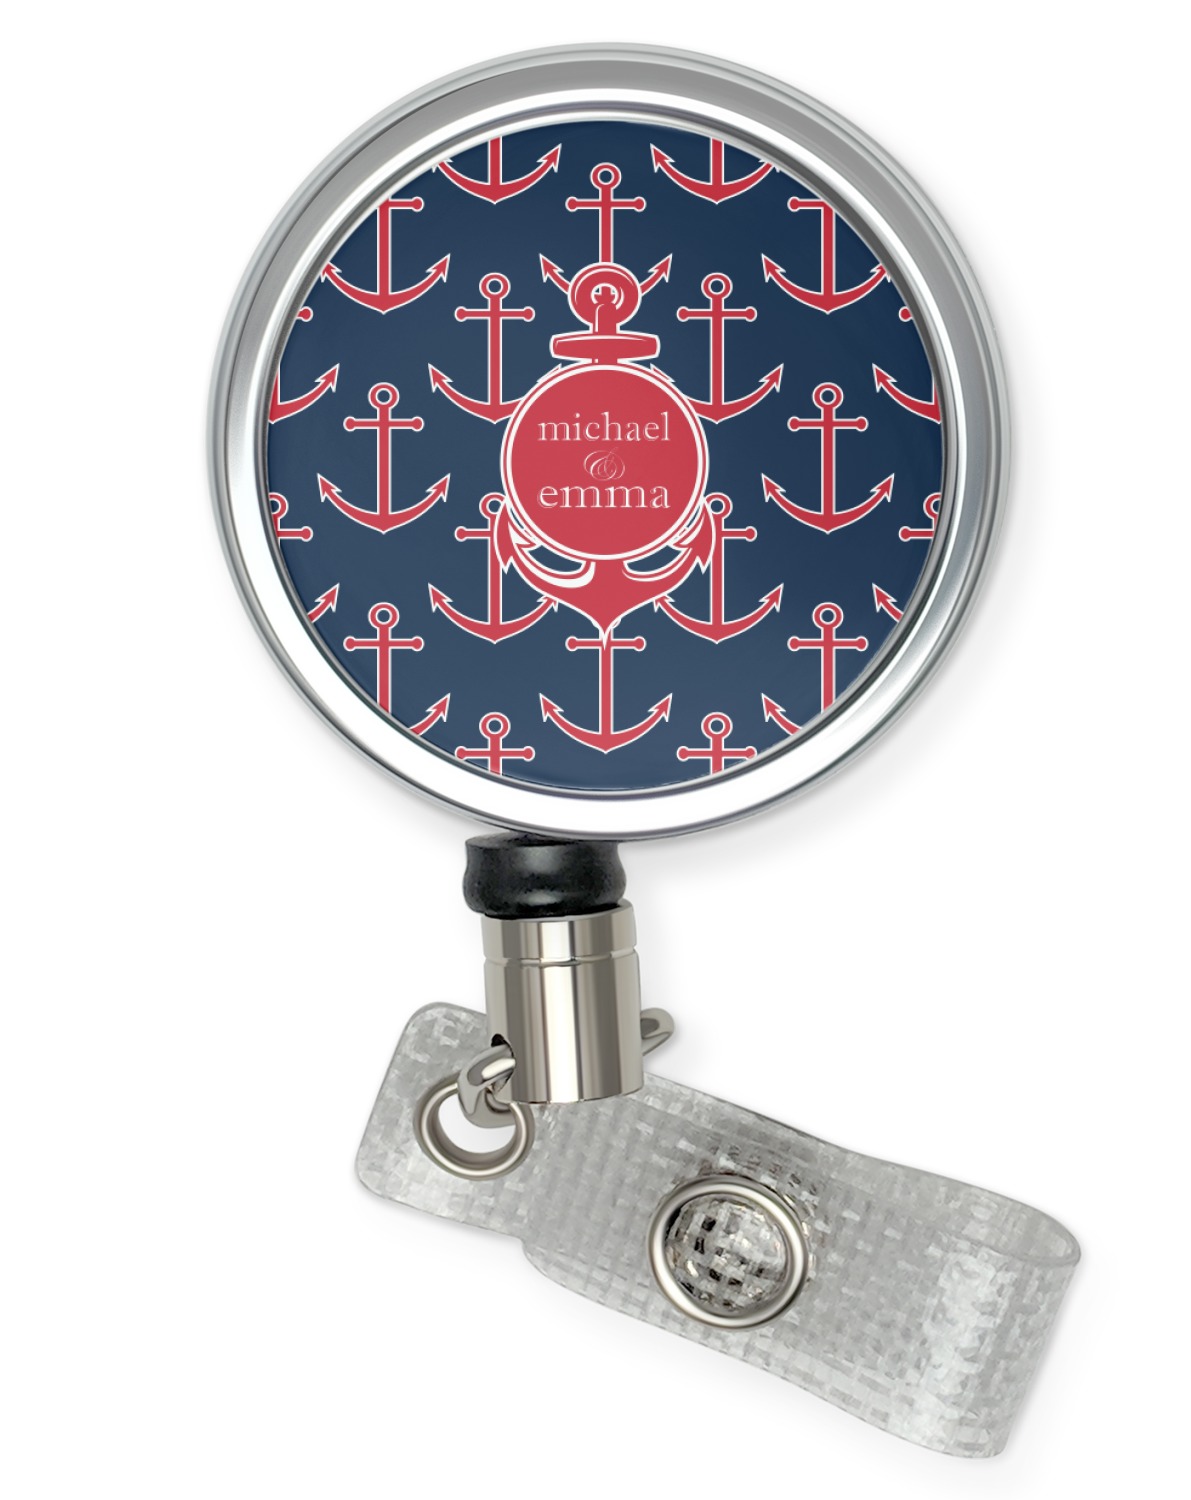 All Anchors Retractable Badge Reel (Personalized) | Office Badge Reel Clip | Nurse Badge Holder | ID Card Clip Badge Reel